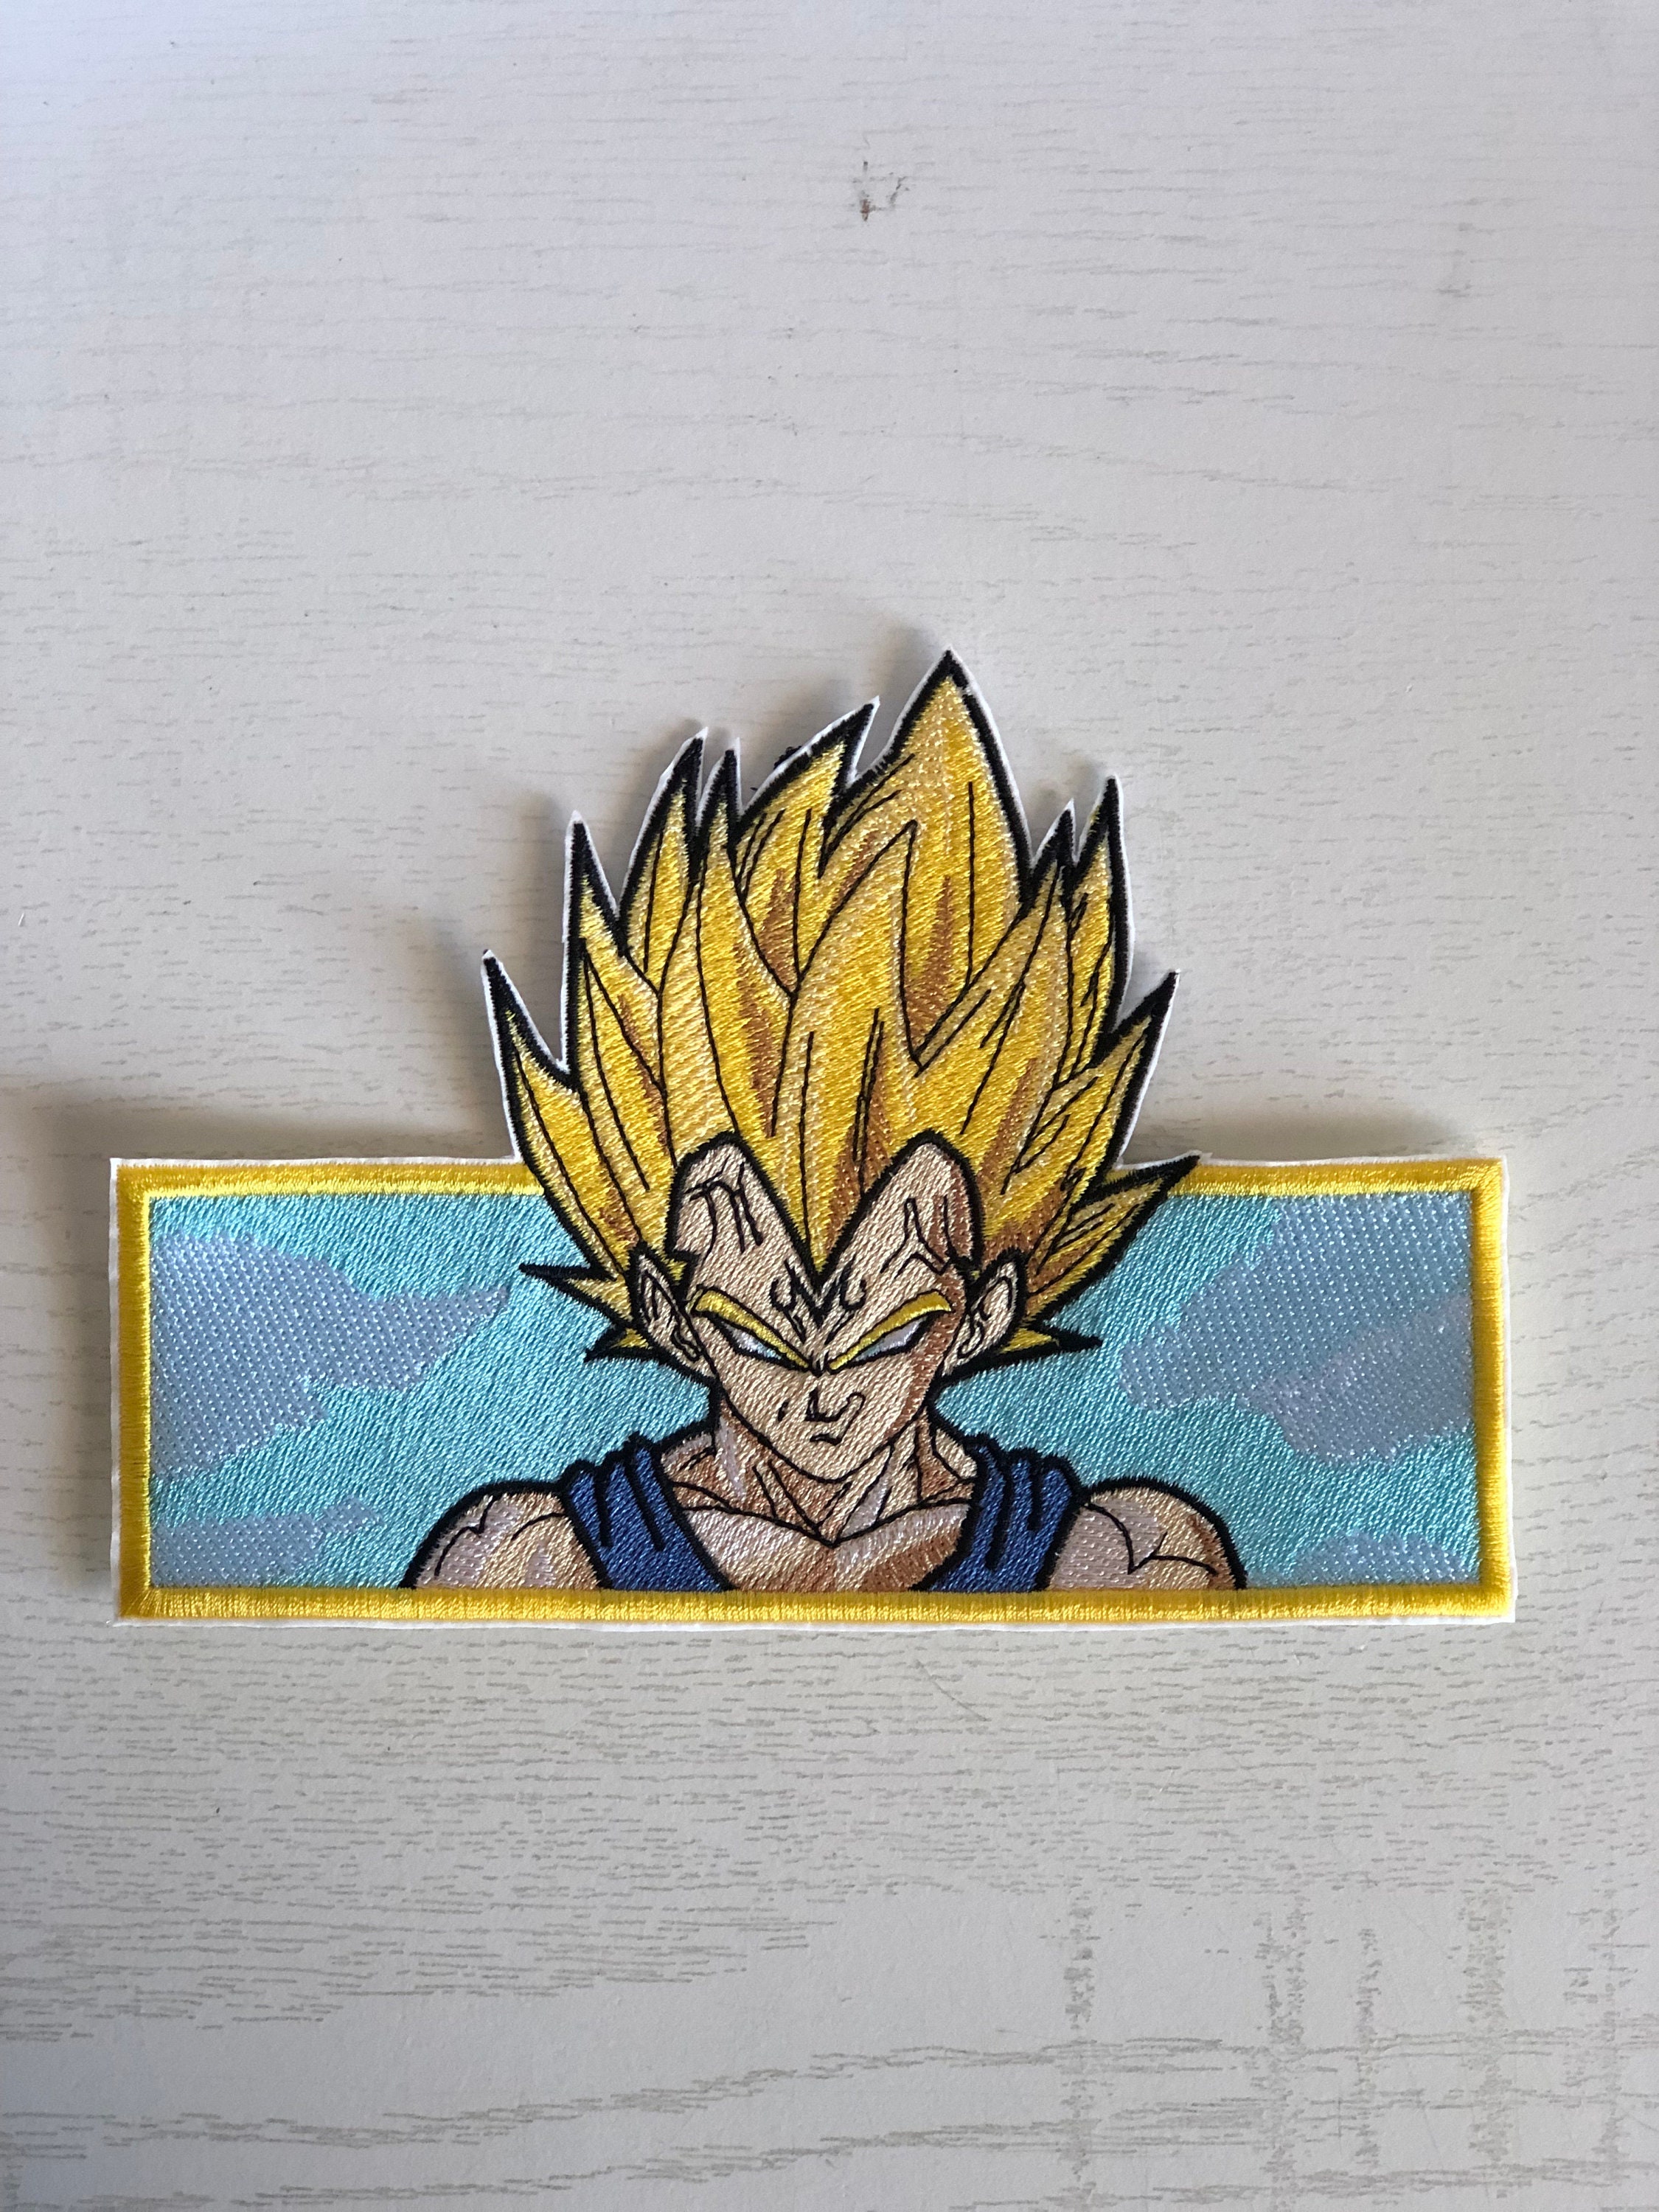 Patches For Clothes Bag Iron On Thermal Stickers Goku Ssj God De